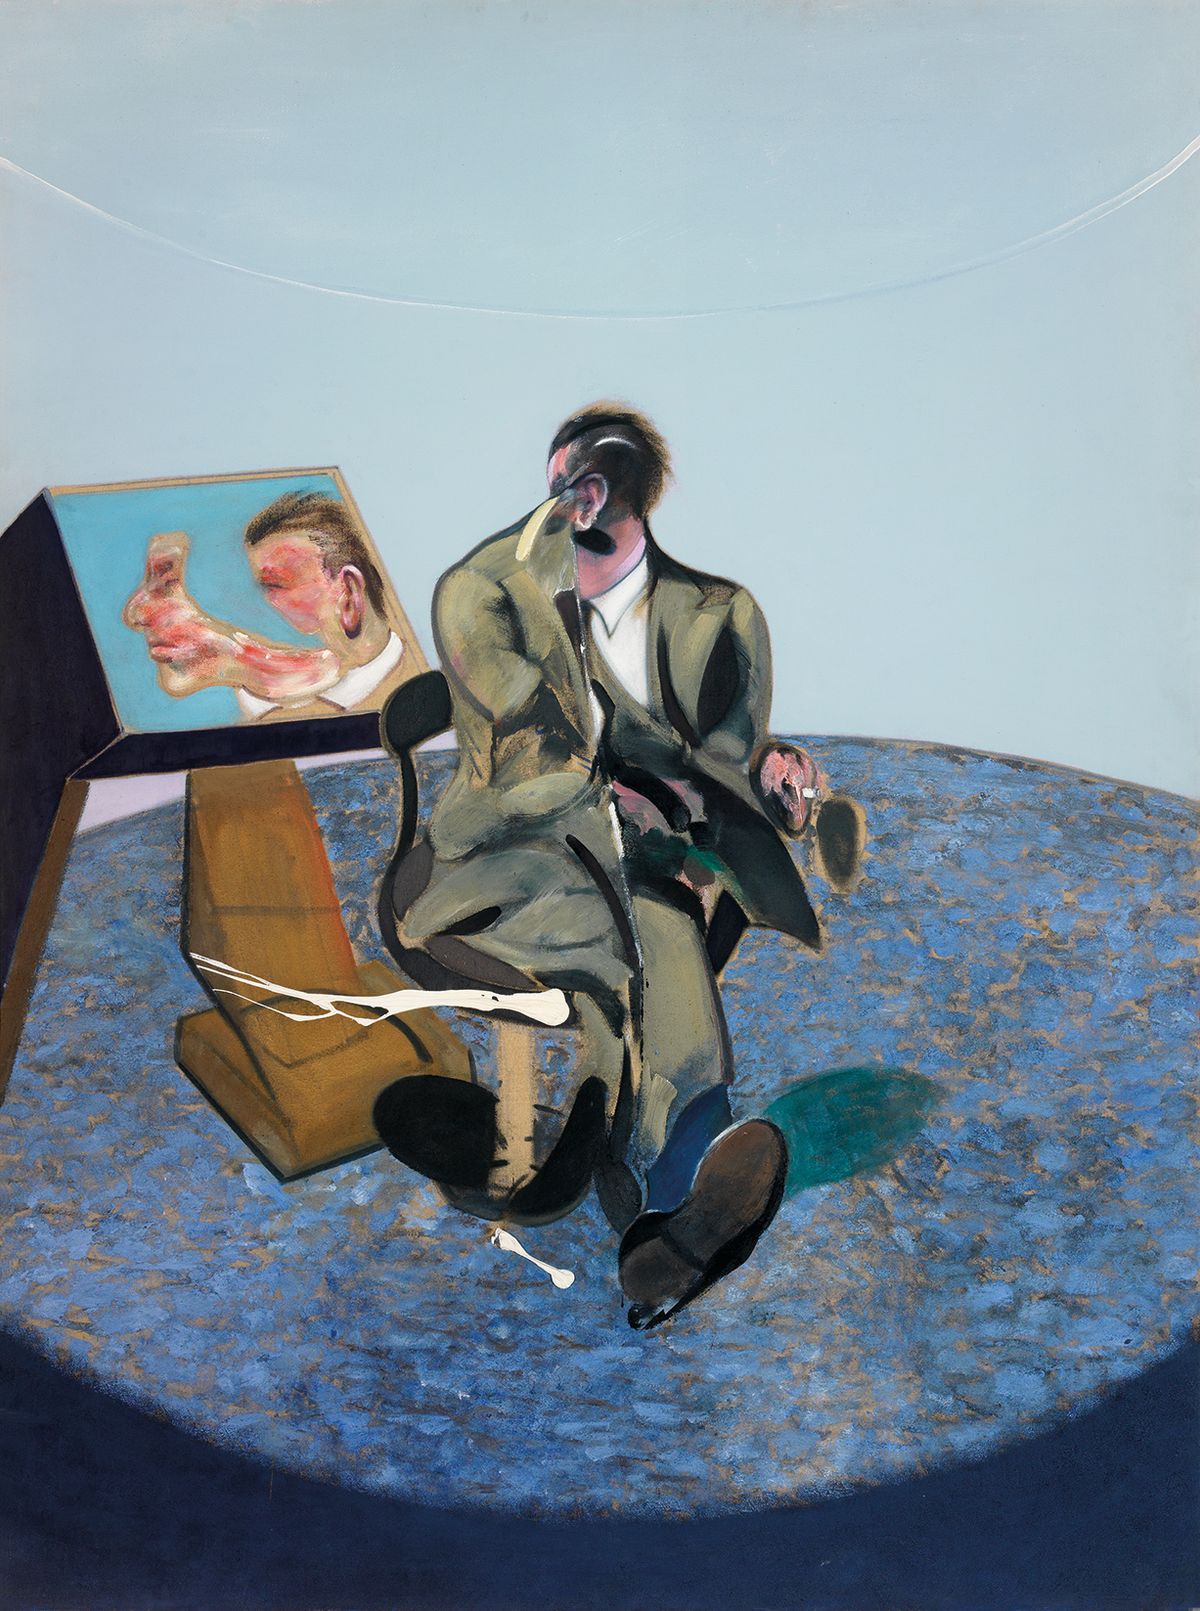 Brutal coupling in real life too:  Francis Bacon’s Portrait of George Dyer in a Mirror (1968) Photo © Hugo Maertens